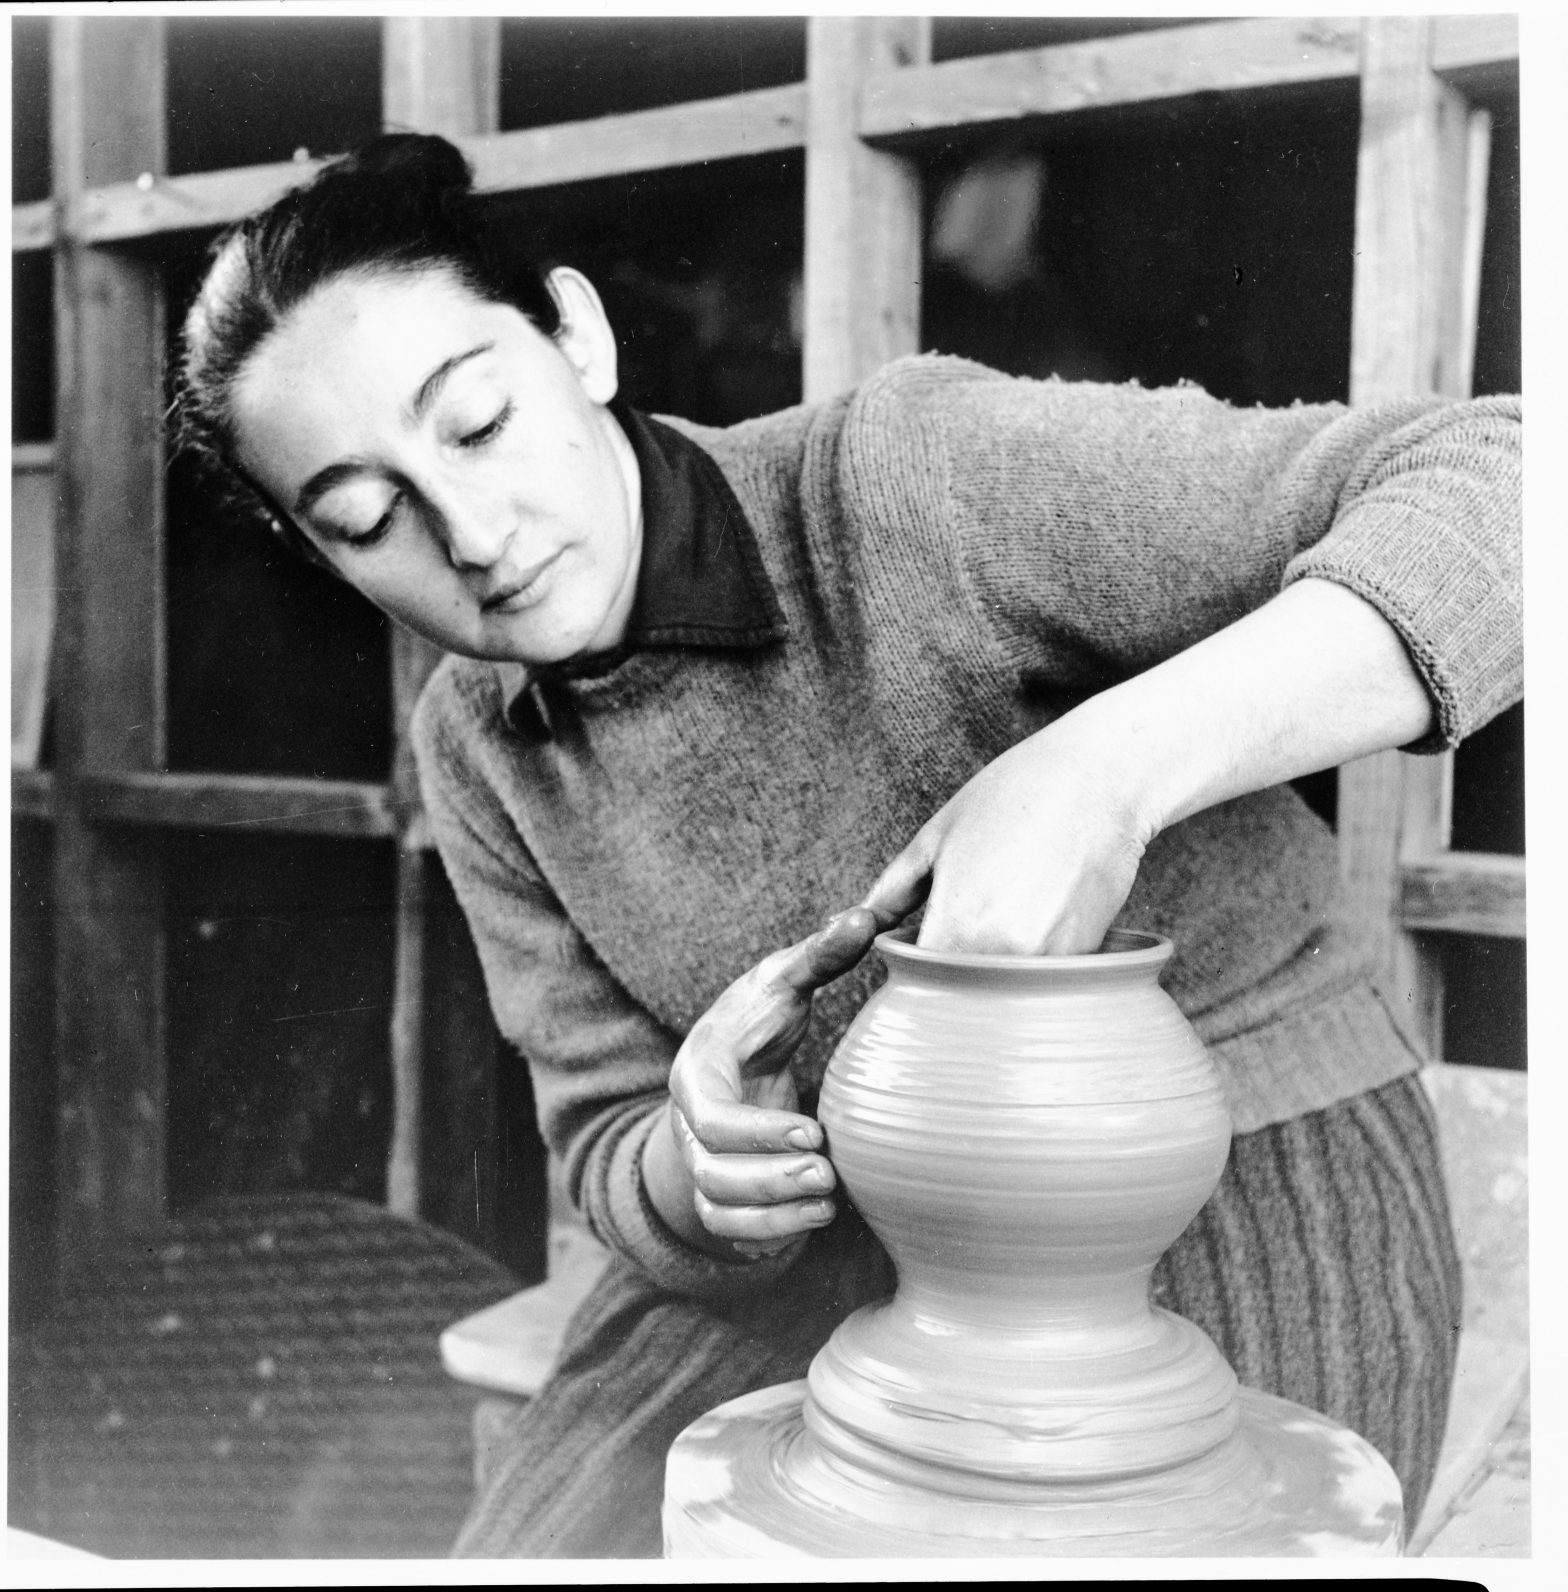 Black and white photo of a white woman working on a ceramic pot on a pottery wheel.